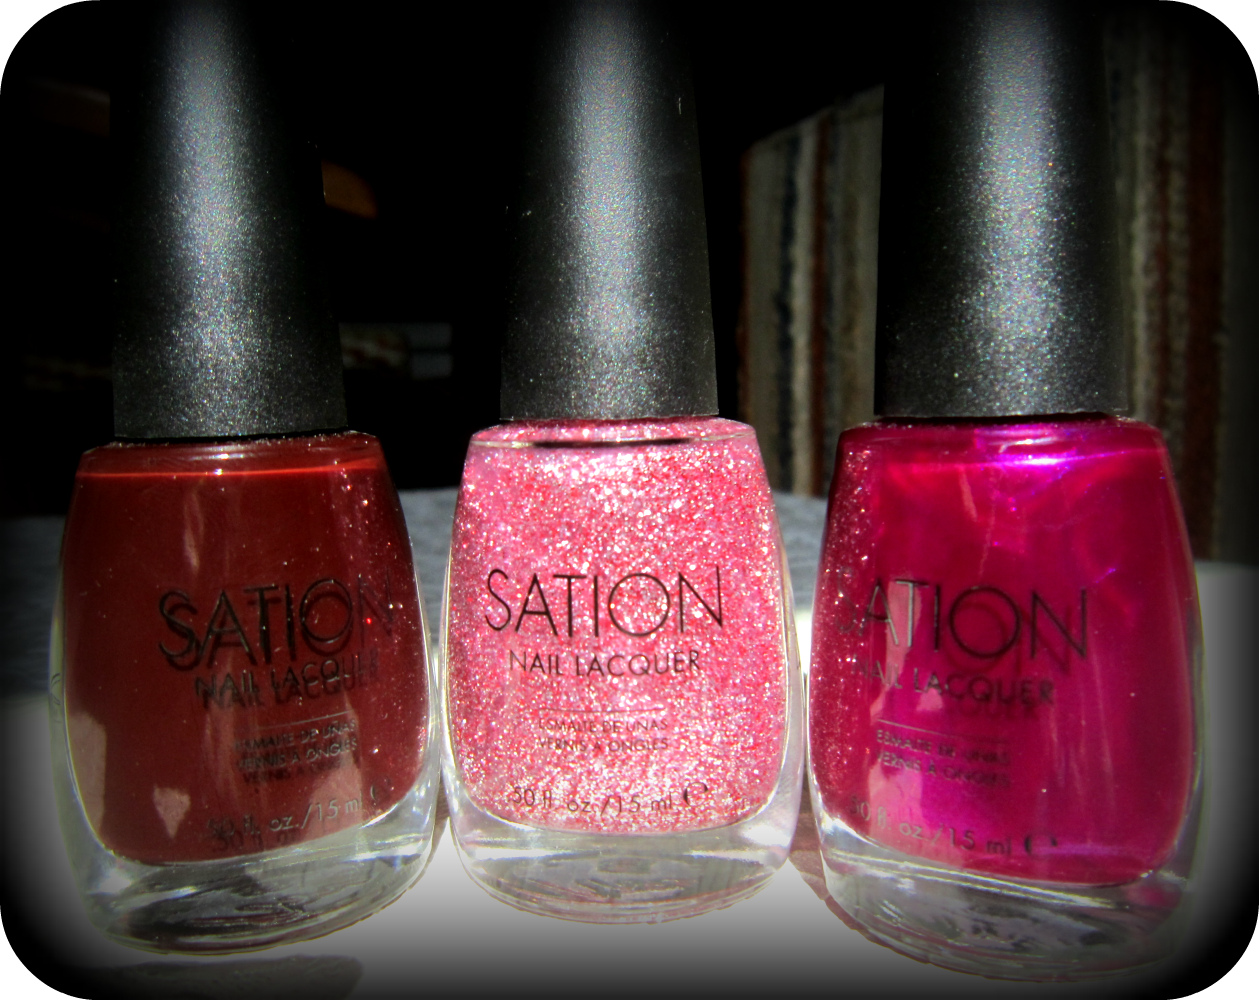 3. Sation Nail Polish in "Color Me Chic" - wide 8